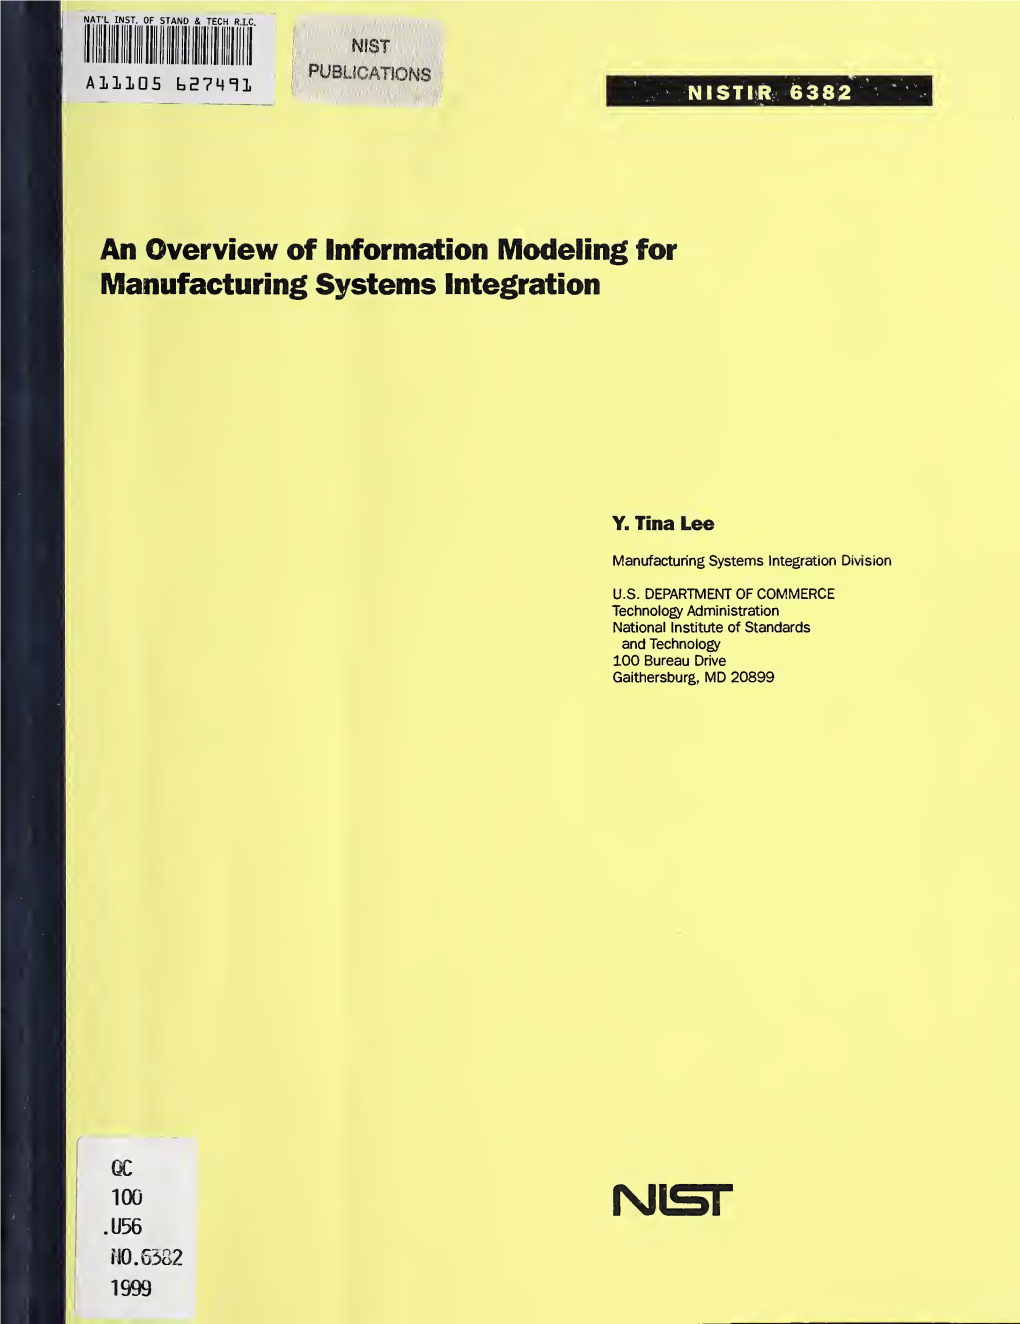 An Overview of Information Modeling for Manufacturing Systems Integration